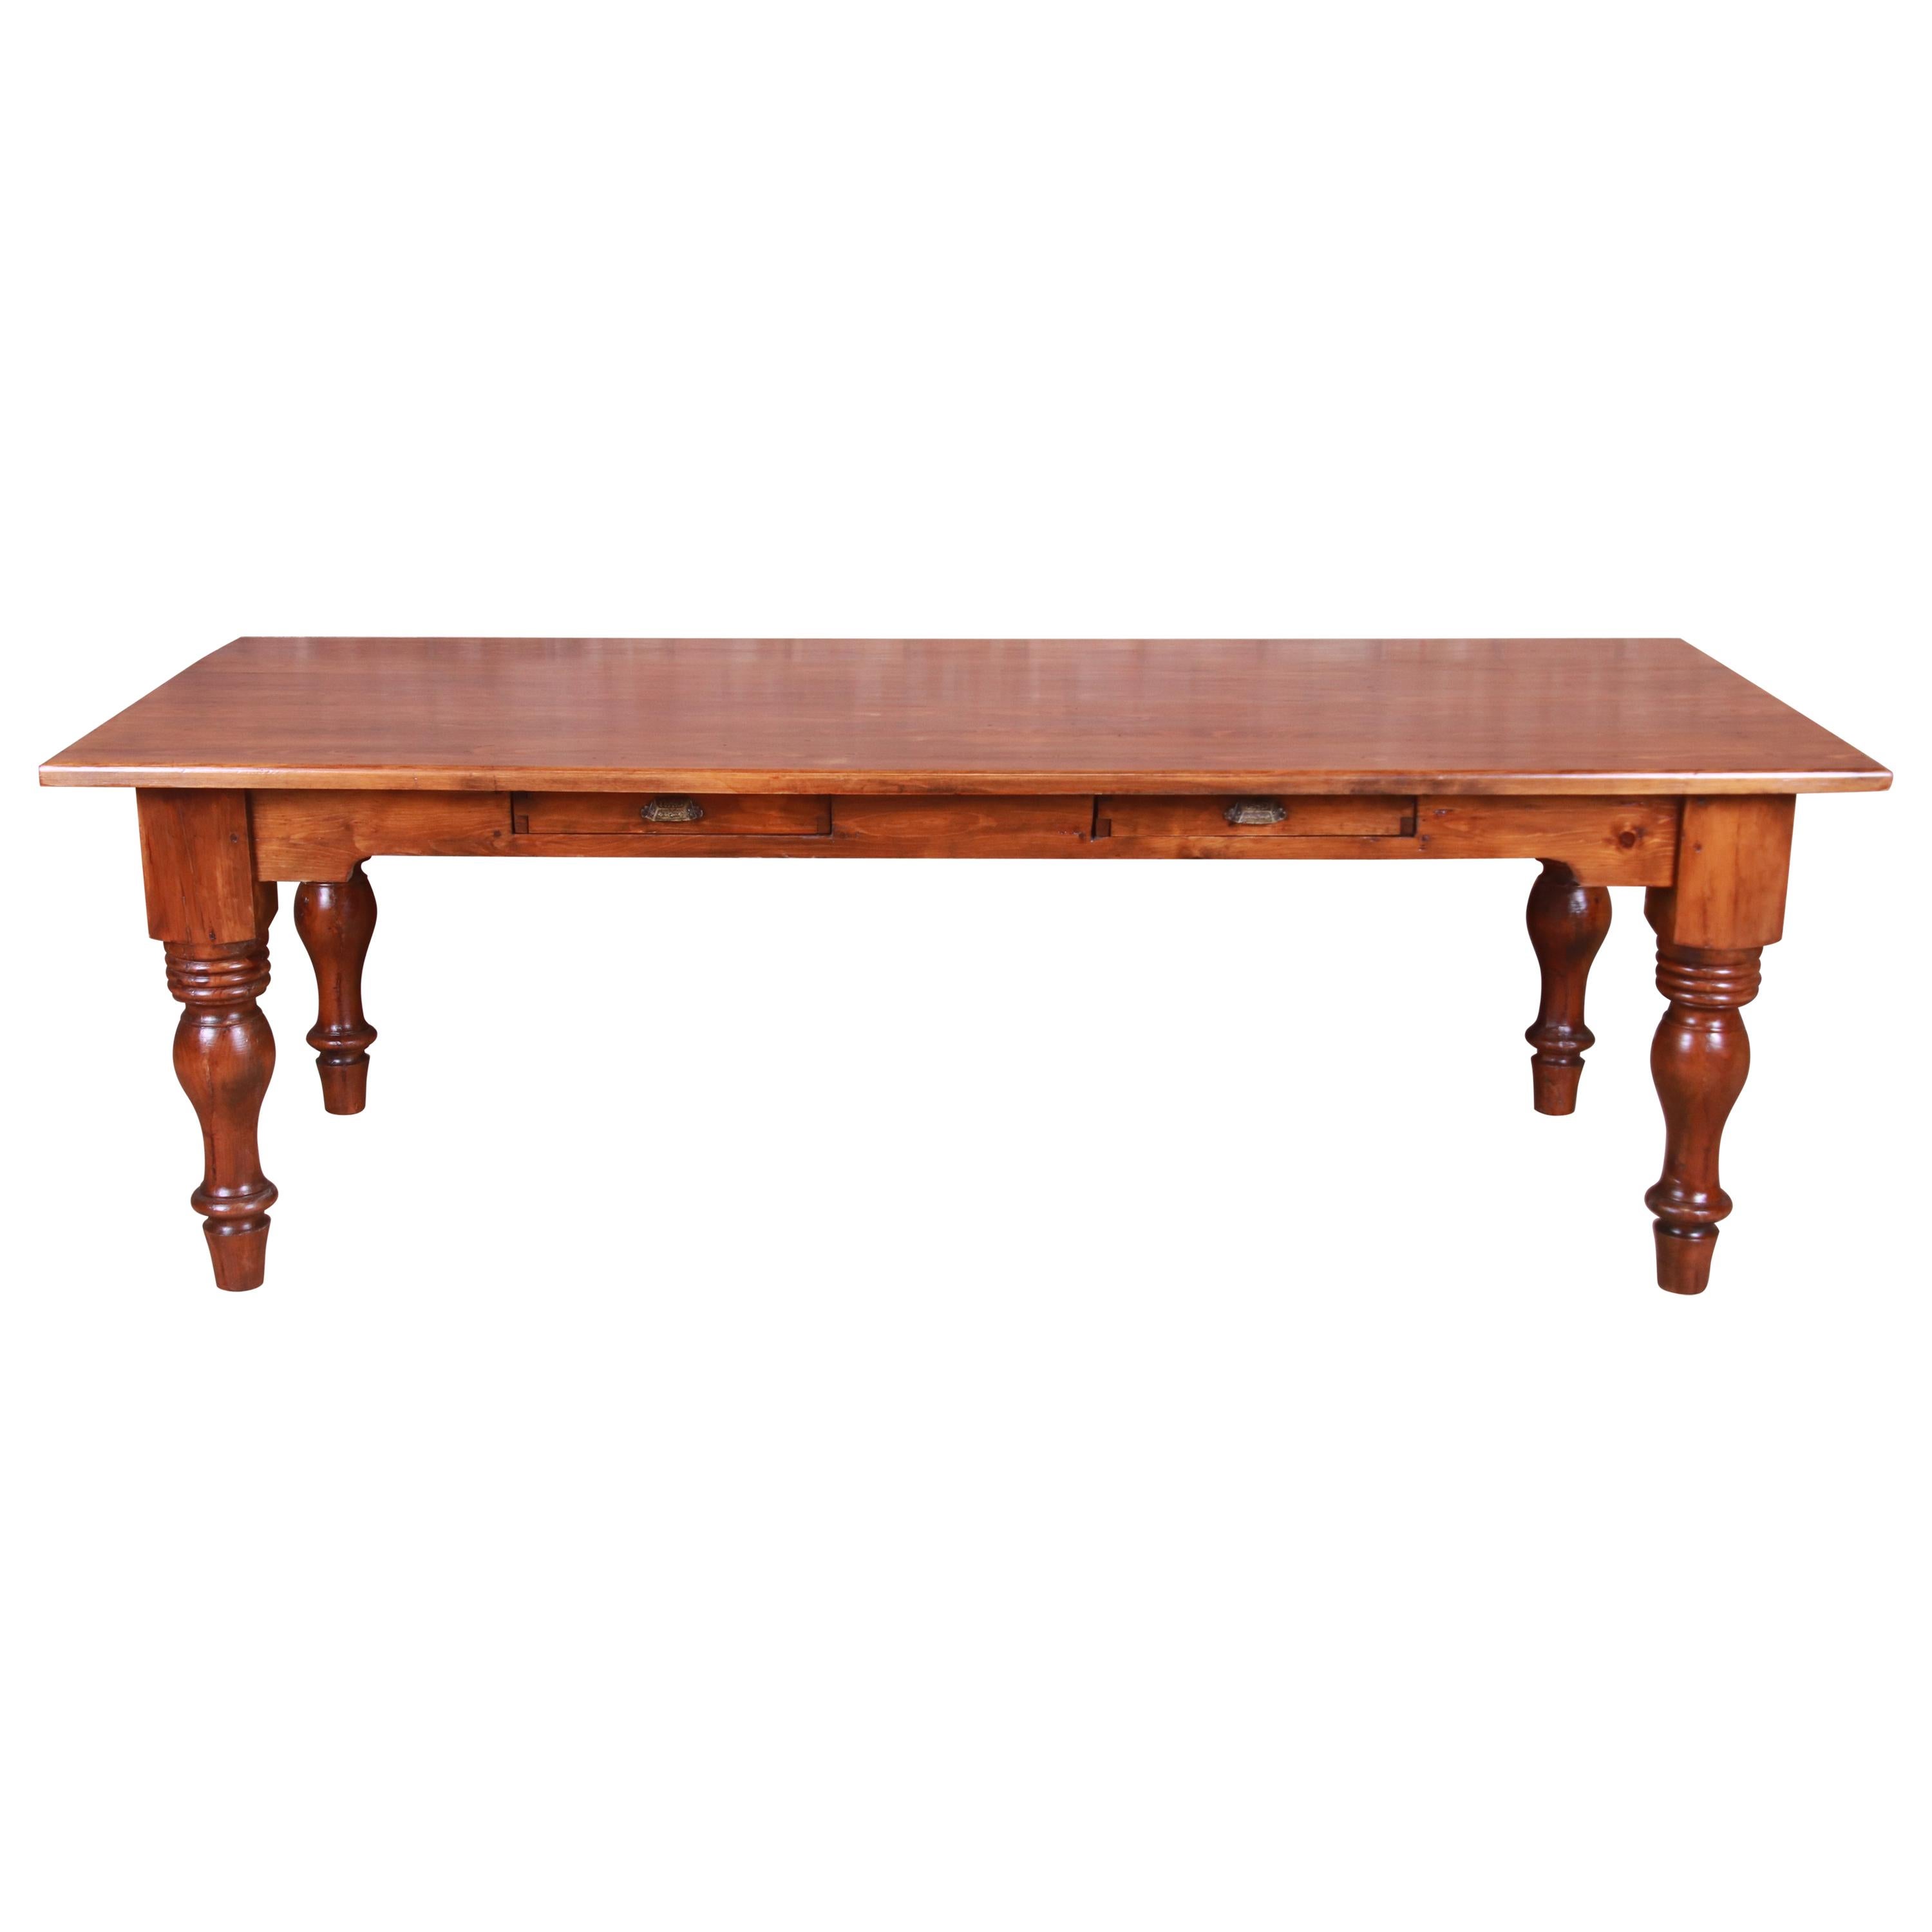 19th Century Rustic Pine American Harvest Farm Table with Drawers